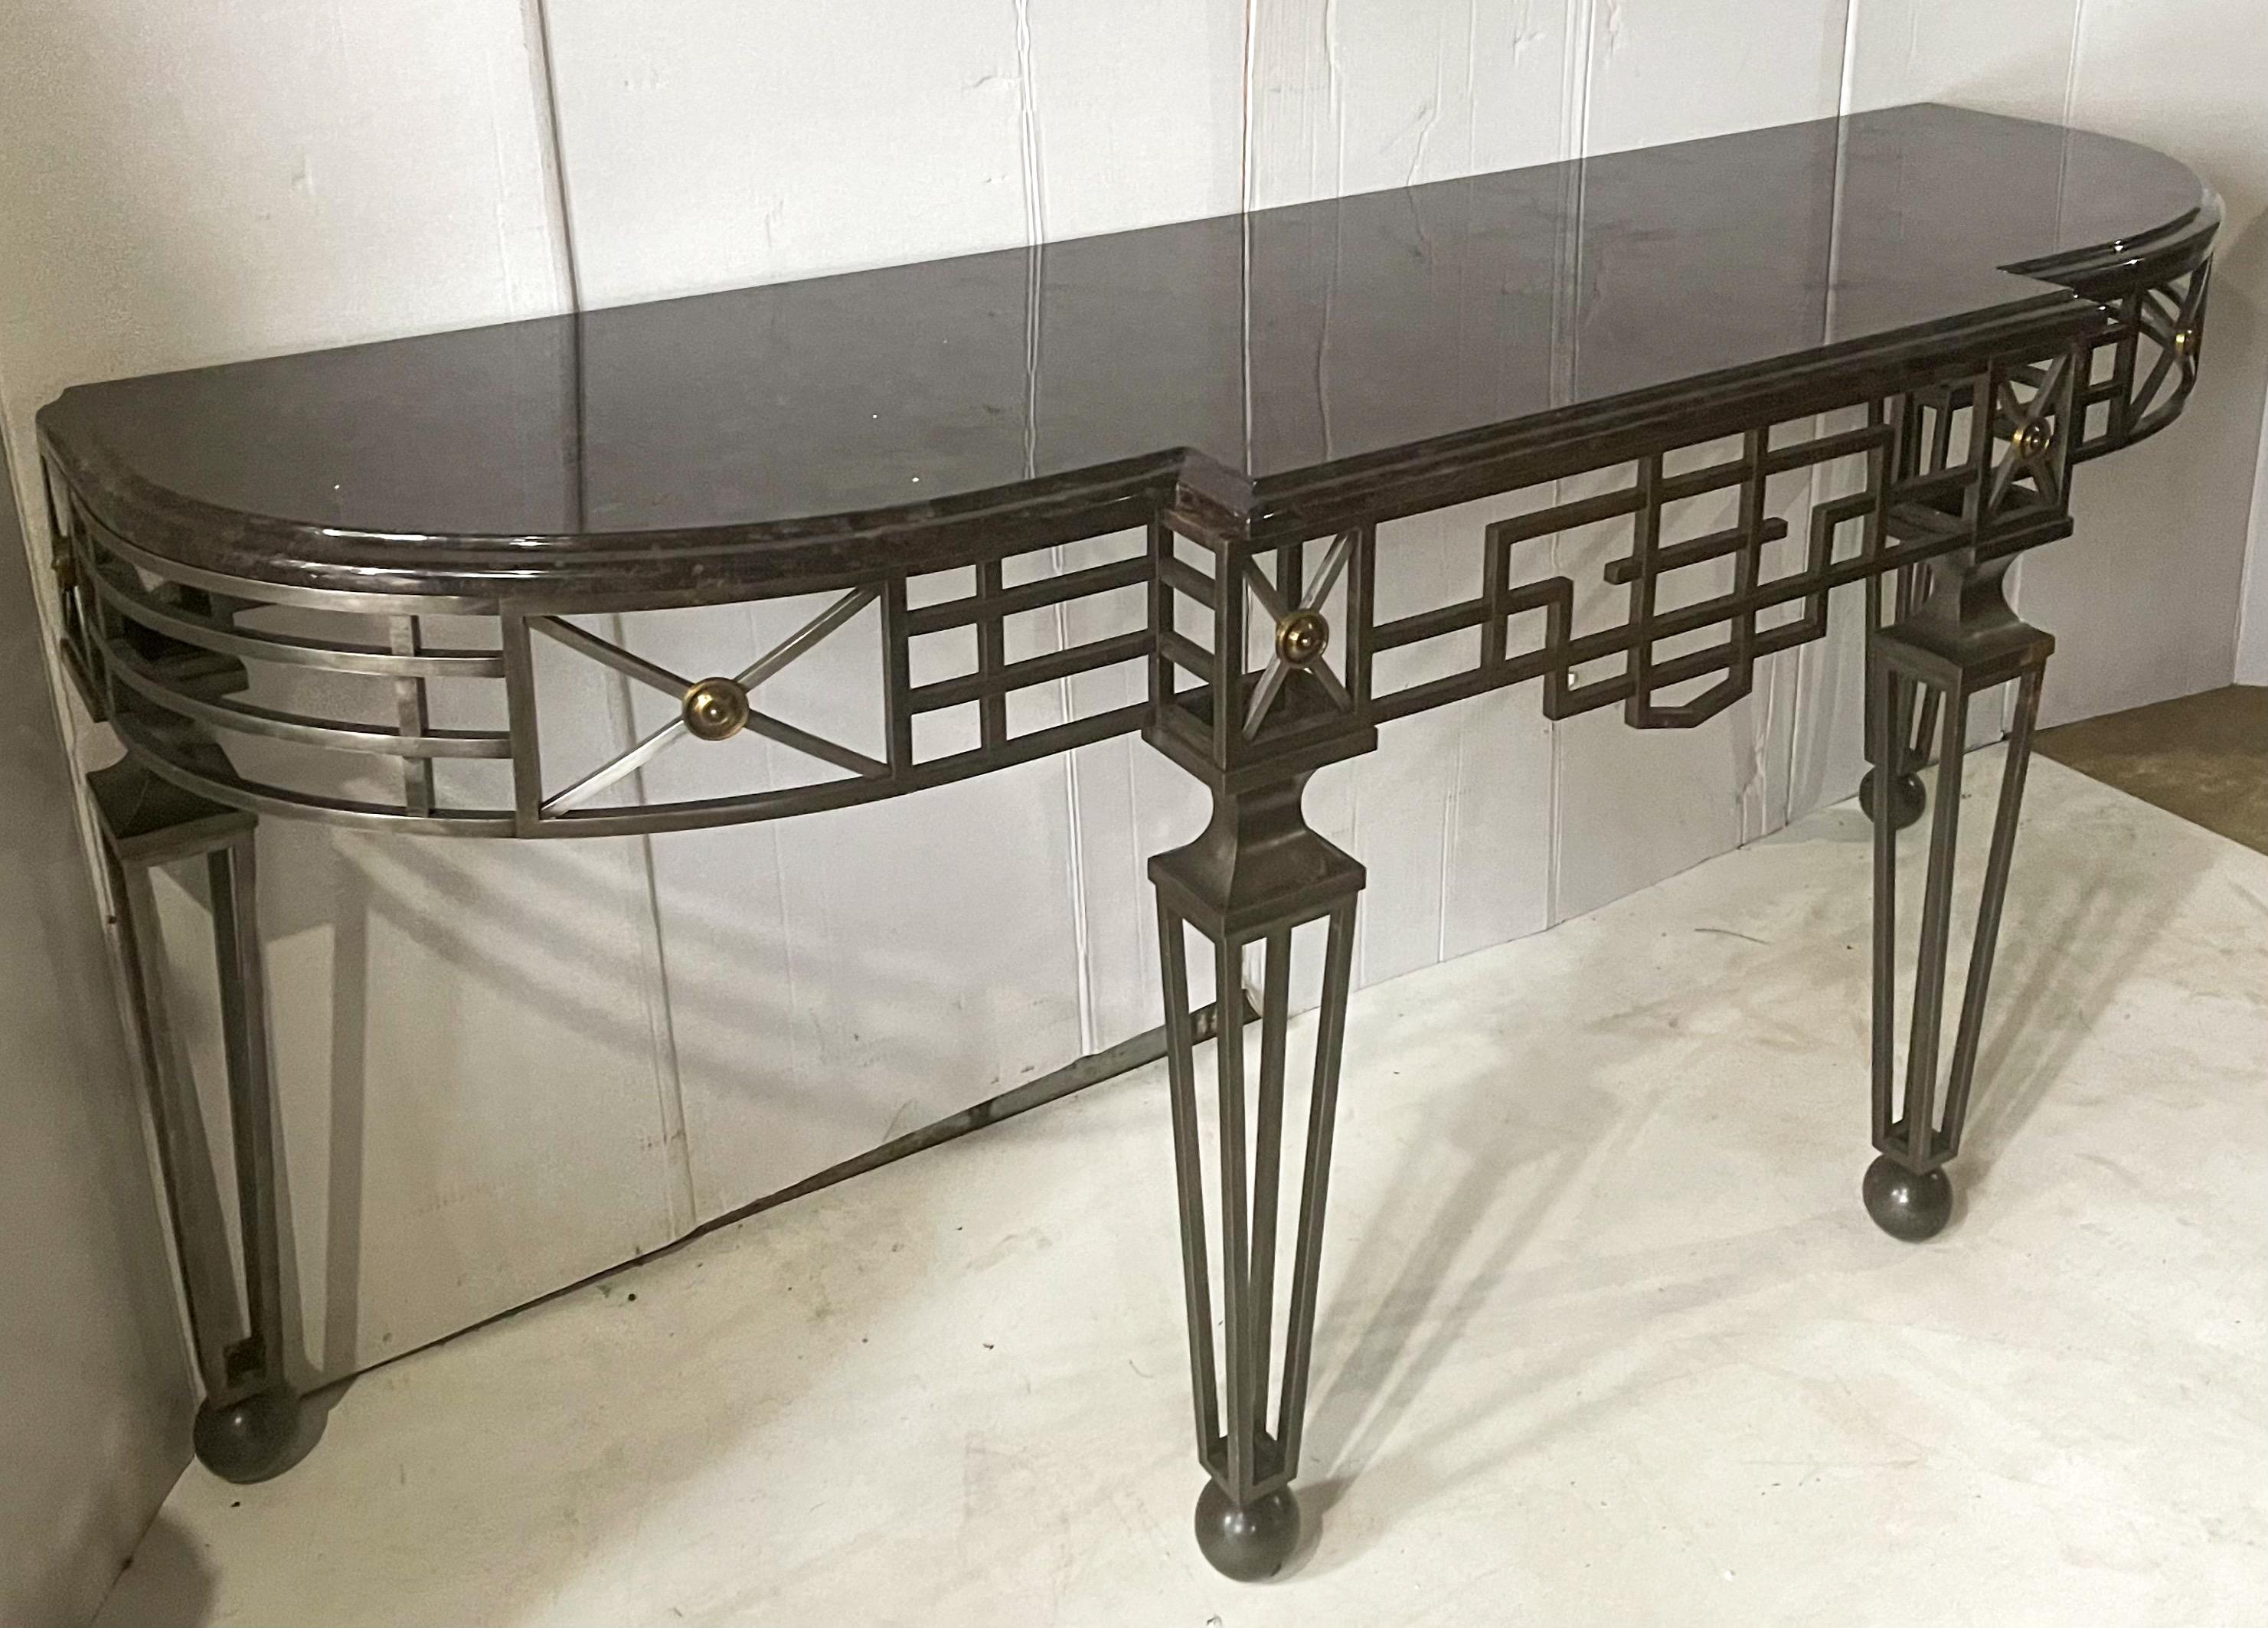 This is a late 20th century Italian neo-classical style iron, brass and granite console table. There are two available. The granite is a tone on tone black with a beveled edge. They are unmarked and in excellent condition. Additional discounts